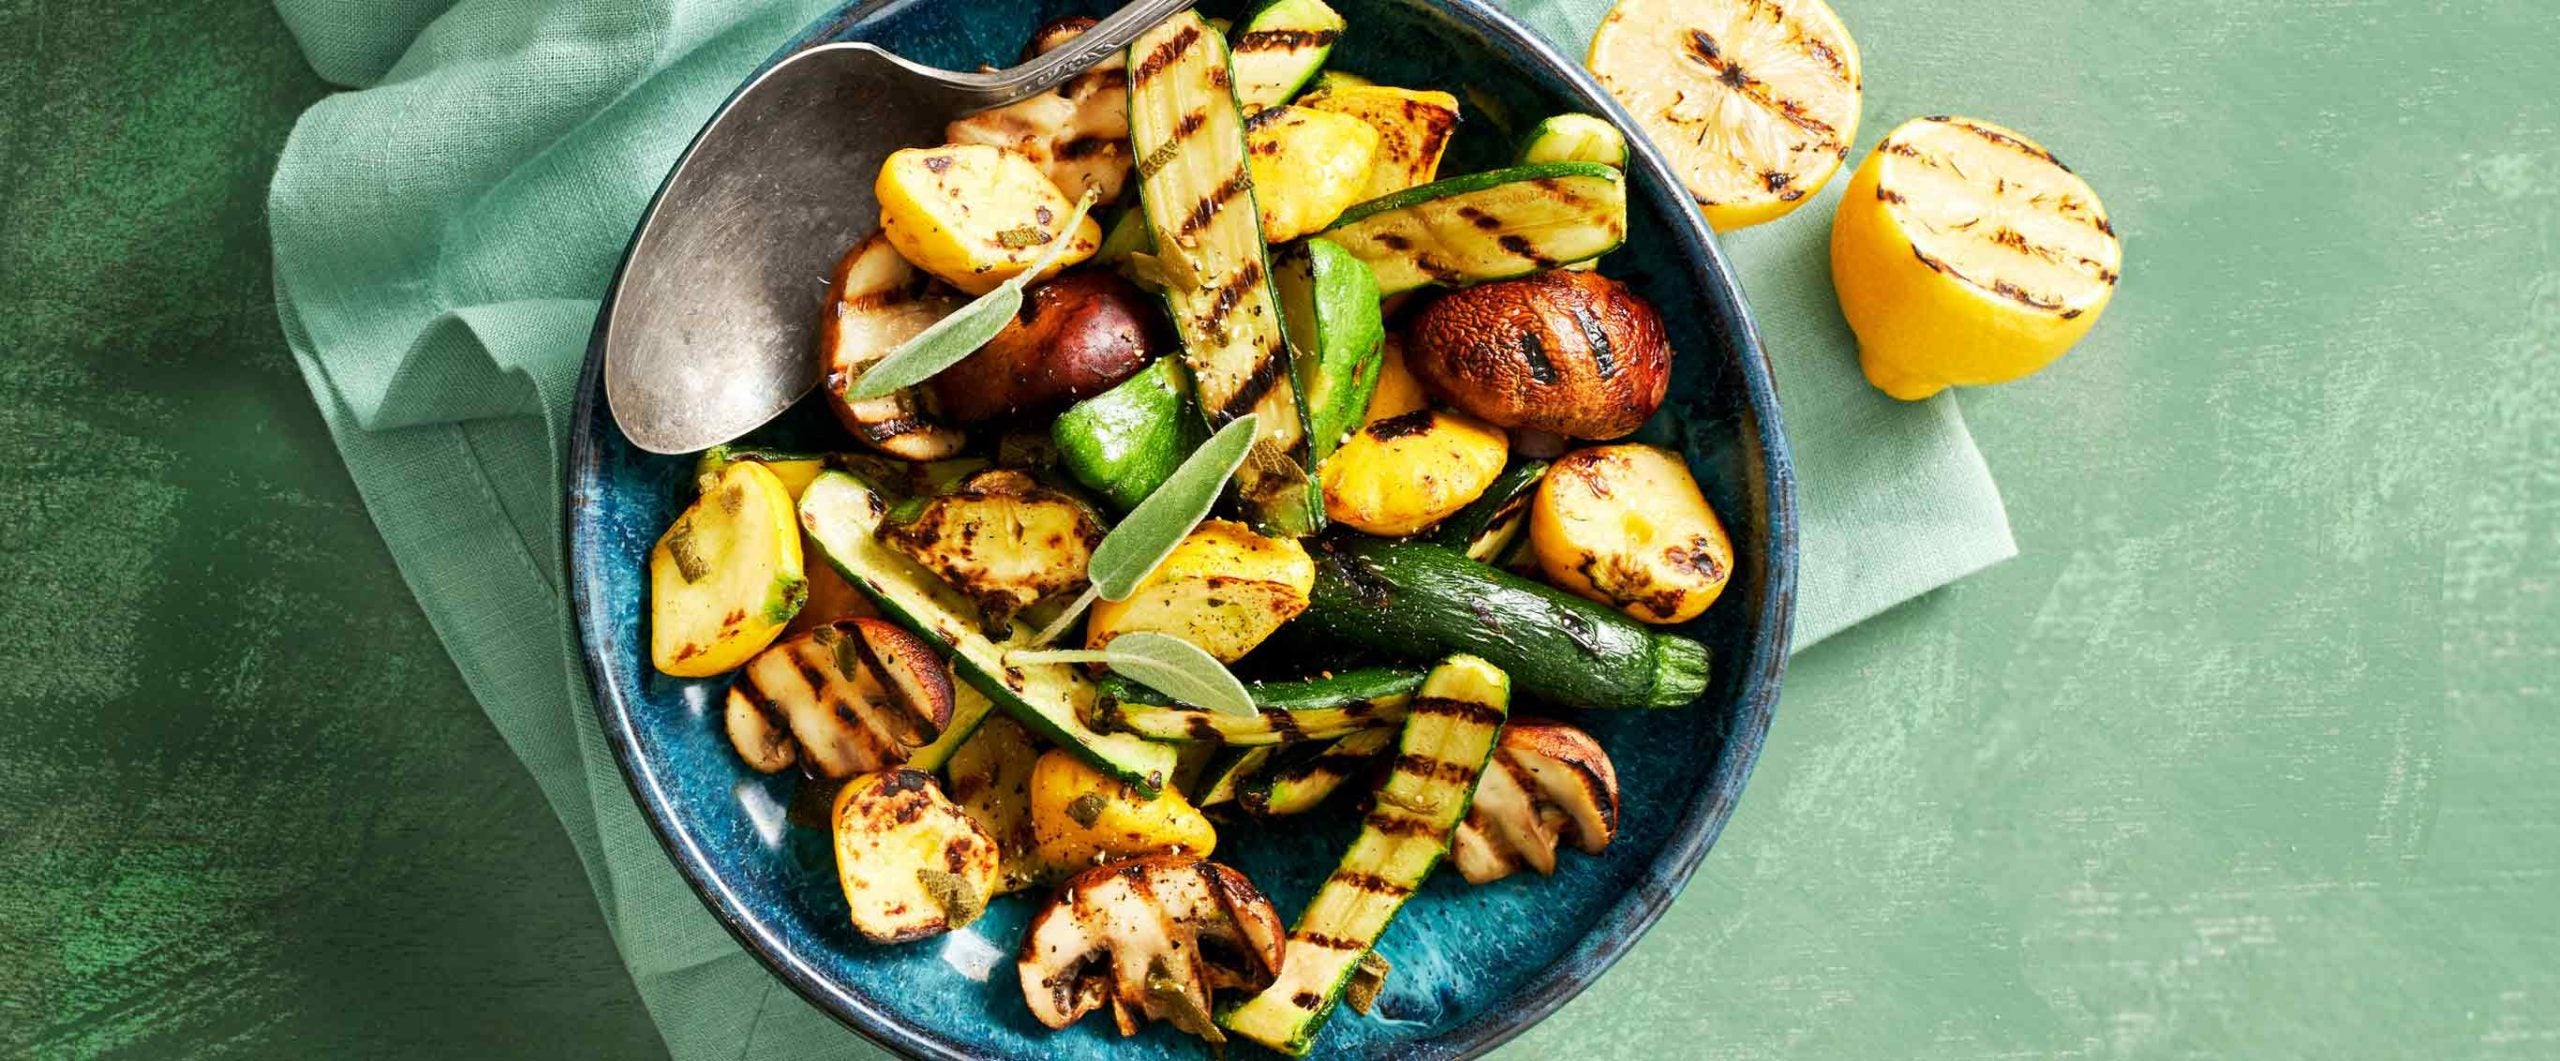 An assortment of grilled zucchini and squash in a blue bowl, with grilled lemon halves to the side on the table